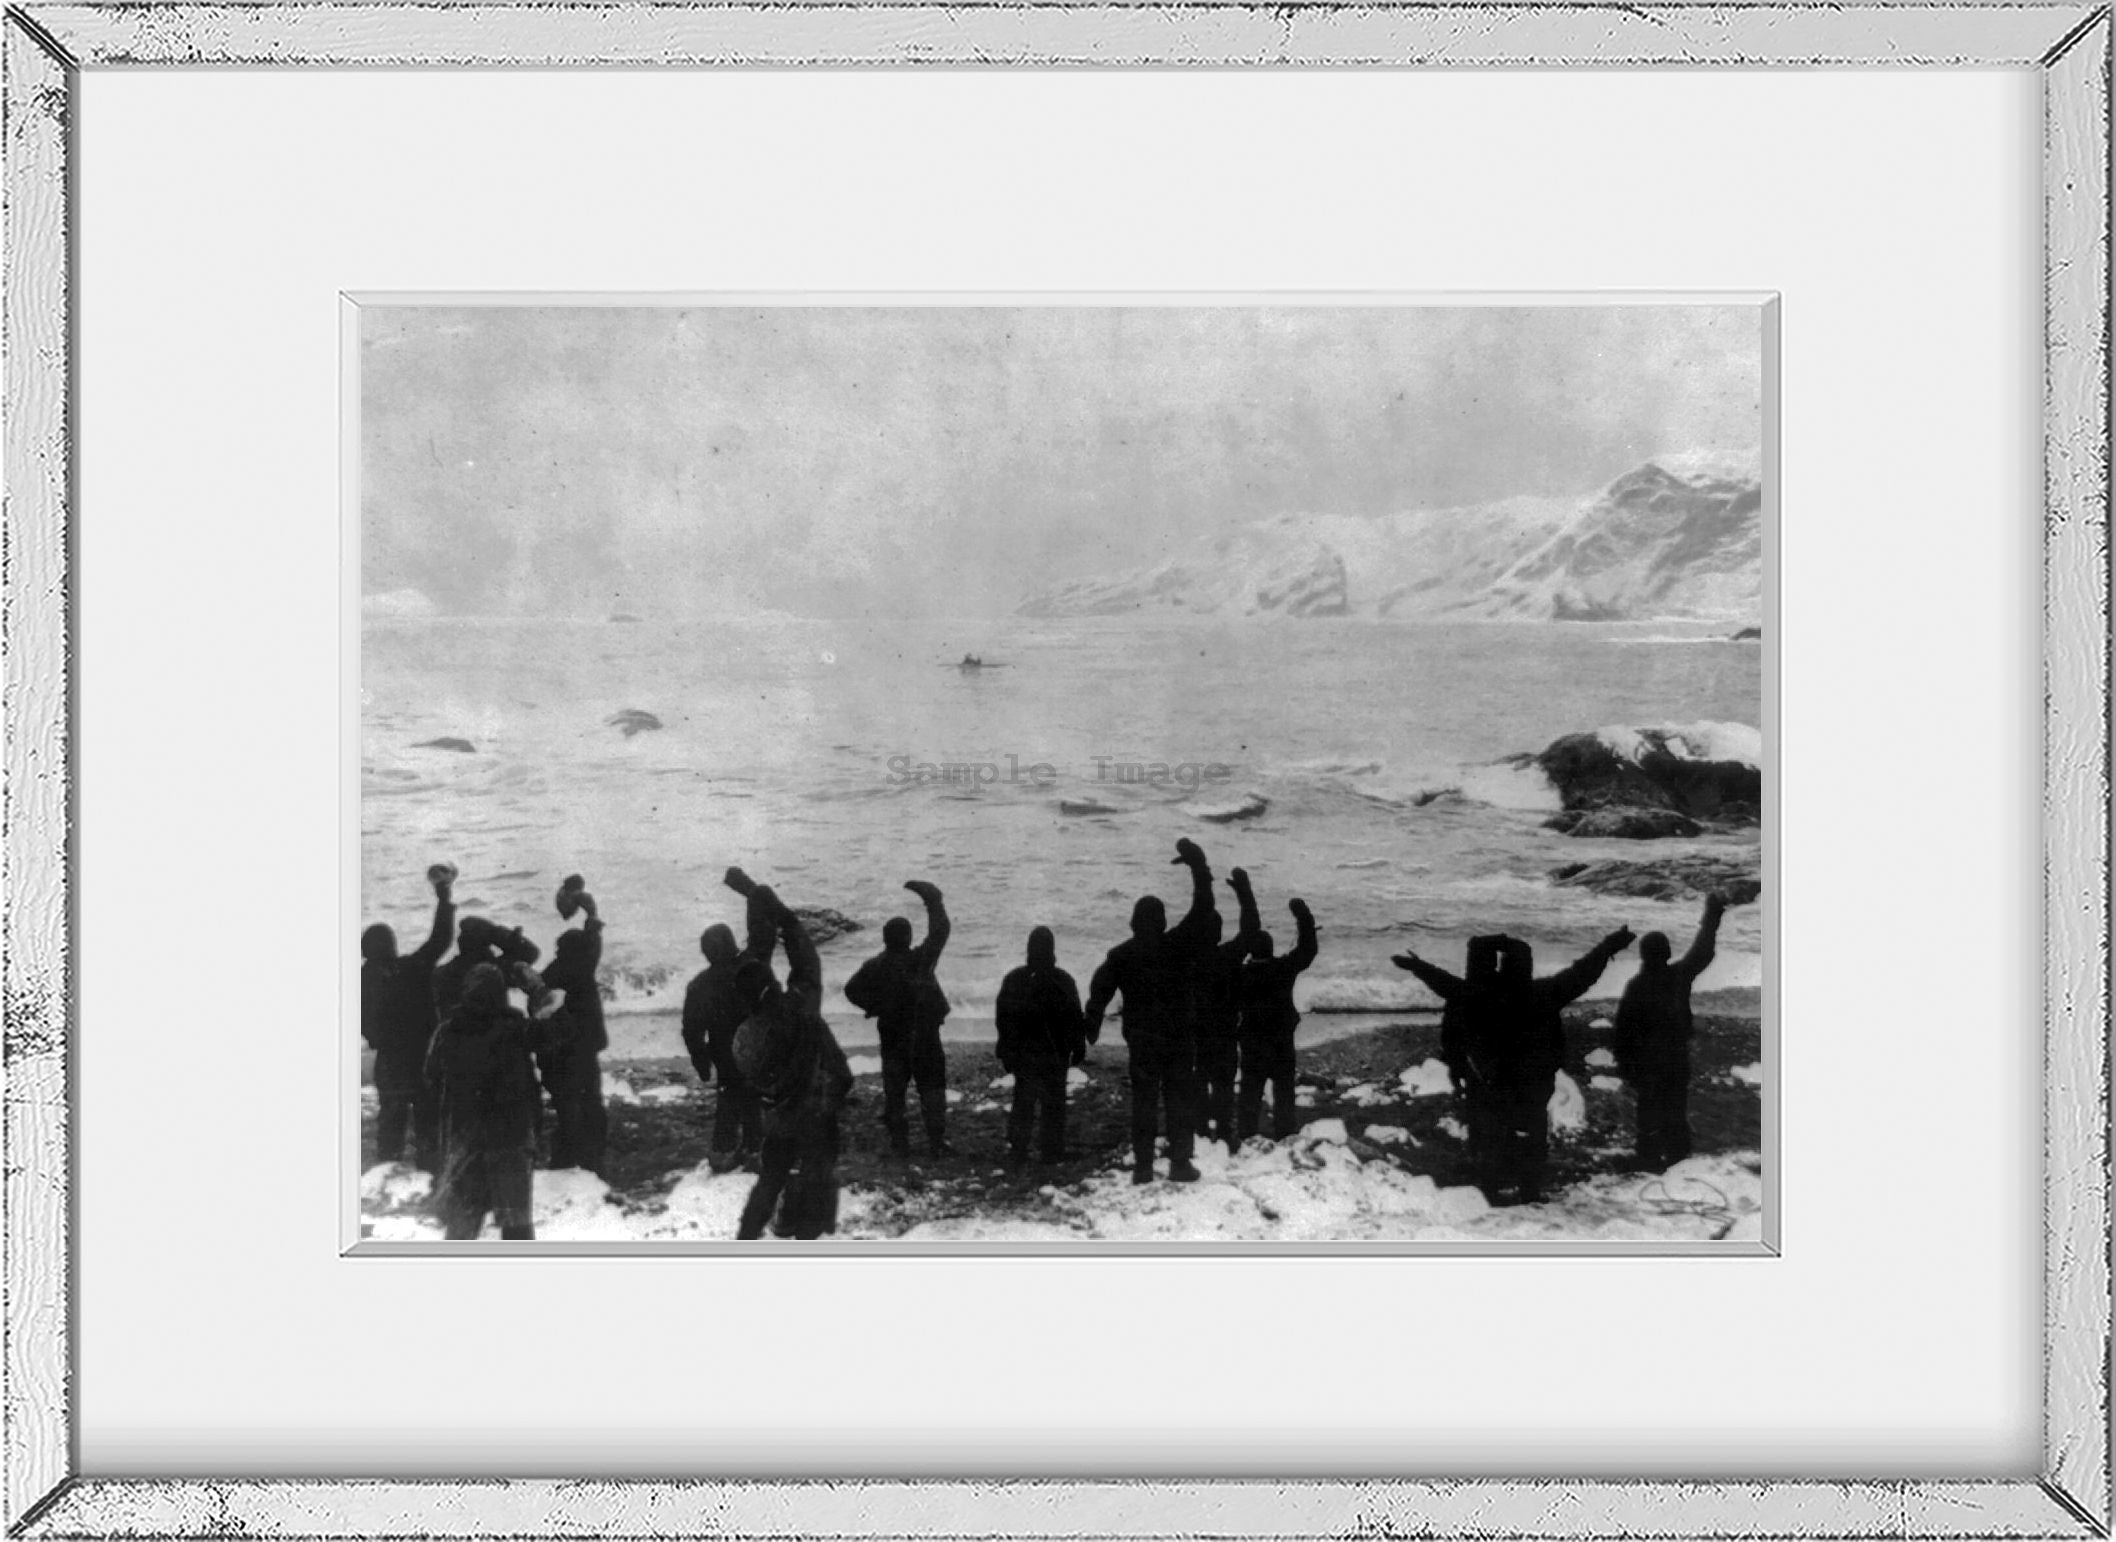 1916 Photo Shackleton's expedition to the Antarctic lost party on Elephant Islan